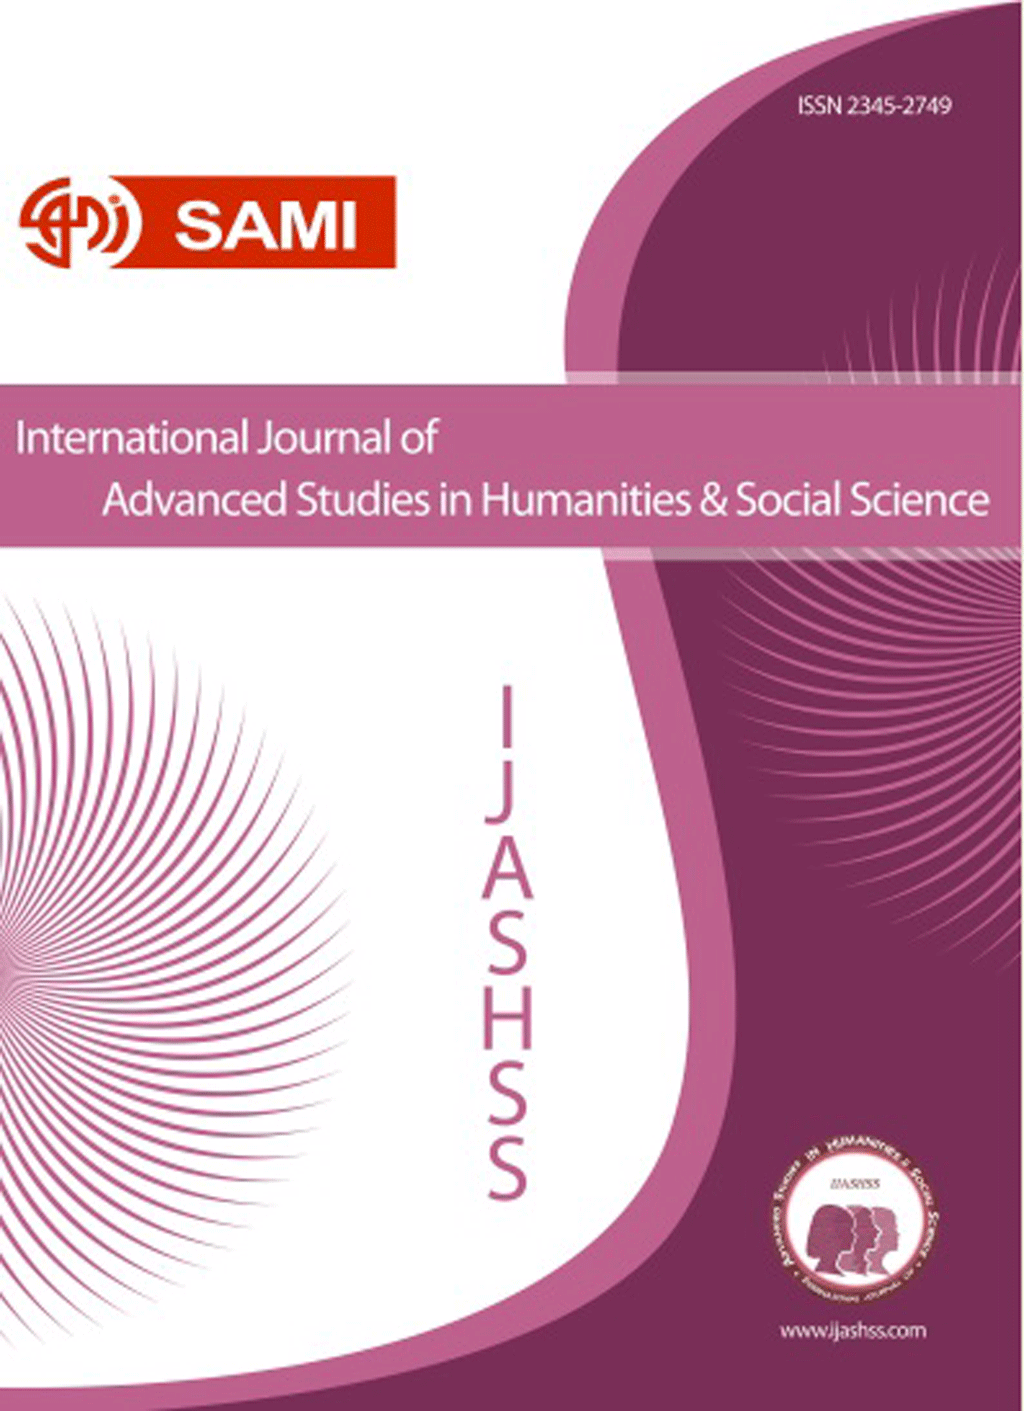 International Journal of Advanced Studies in Humanities and Social Science - April 2014, Volume 2 - Issue 2